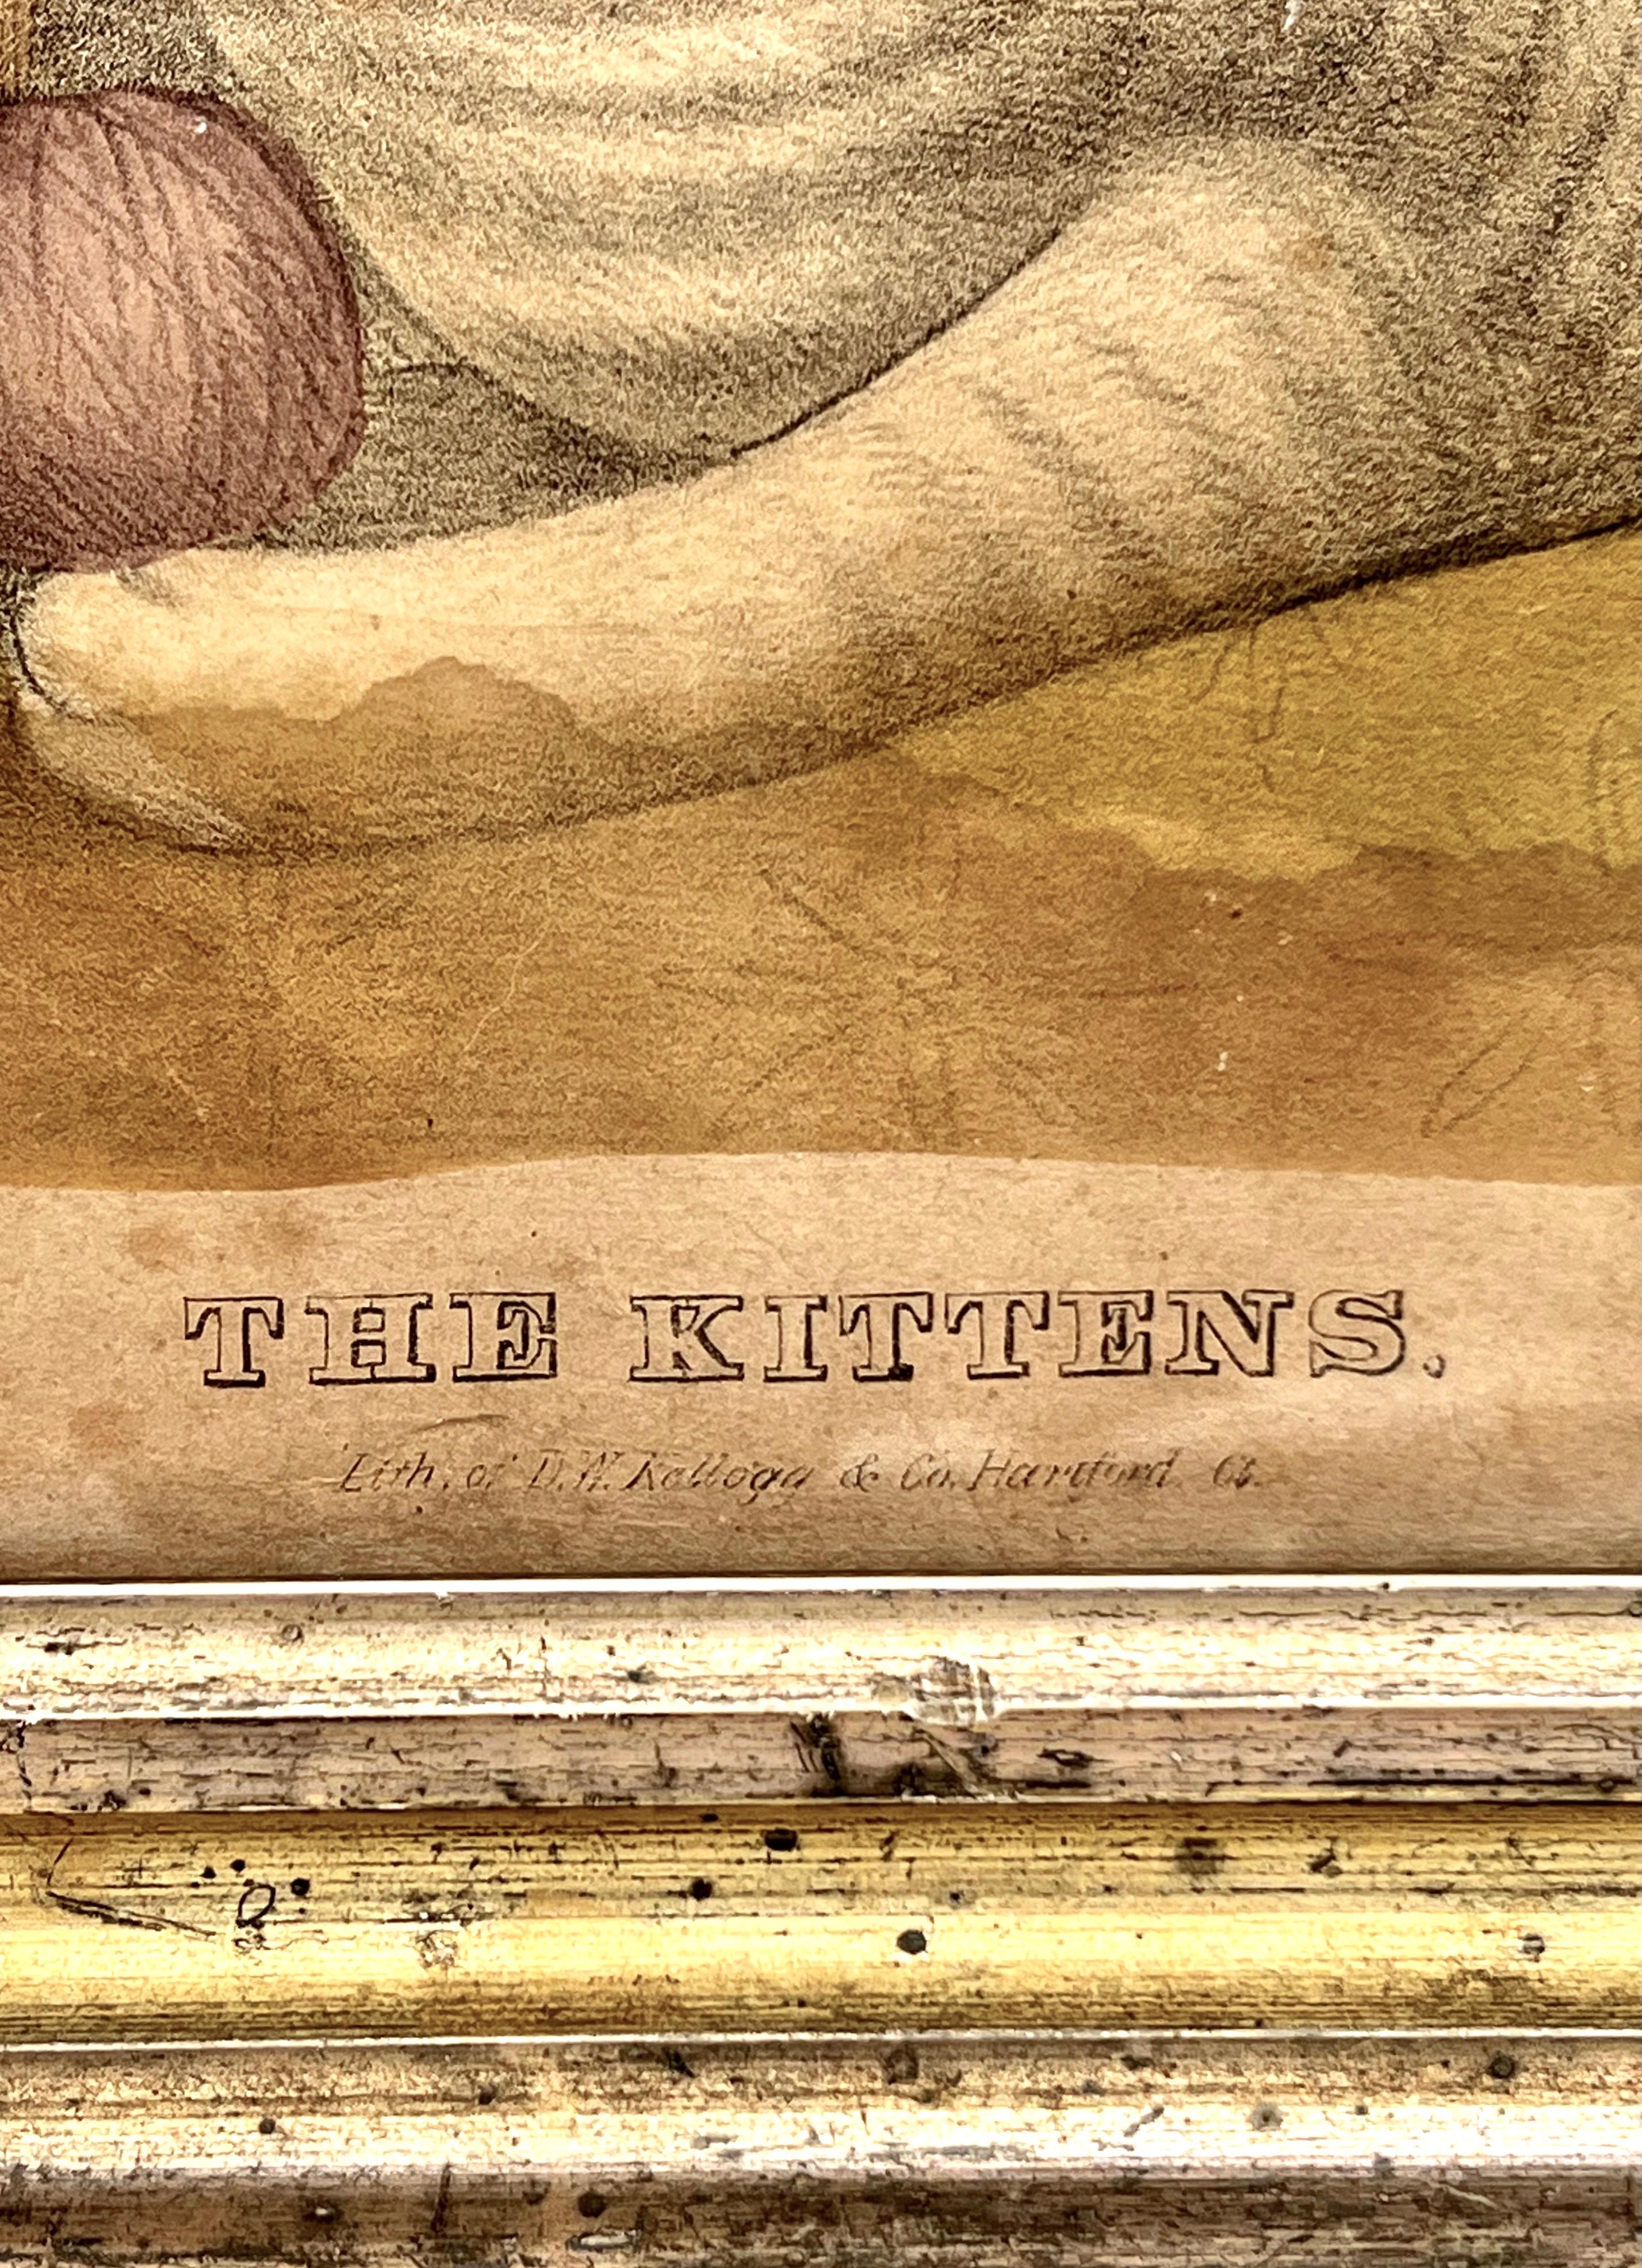 Paper The Kittens, 19th Century Lithograph by DW Kellogg and Comstock For Sale